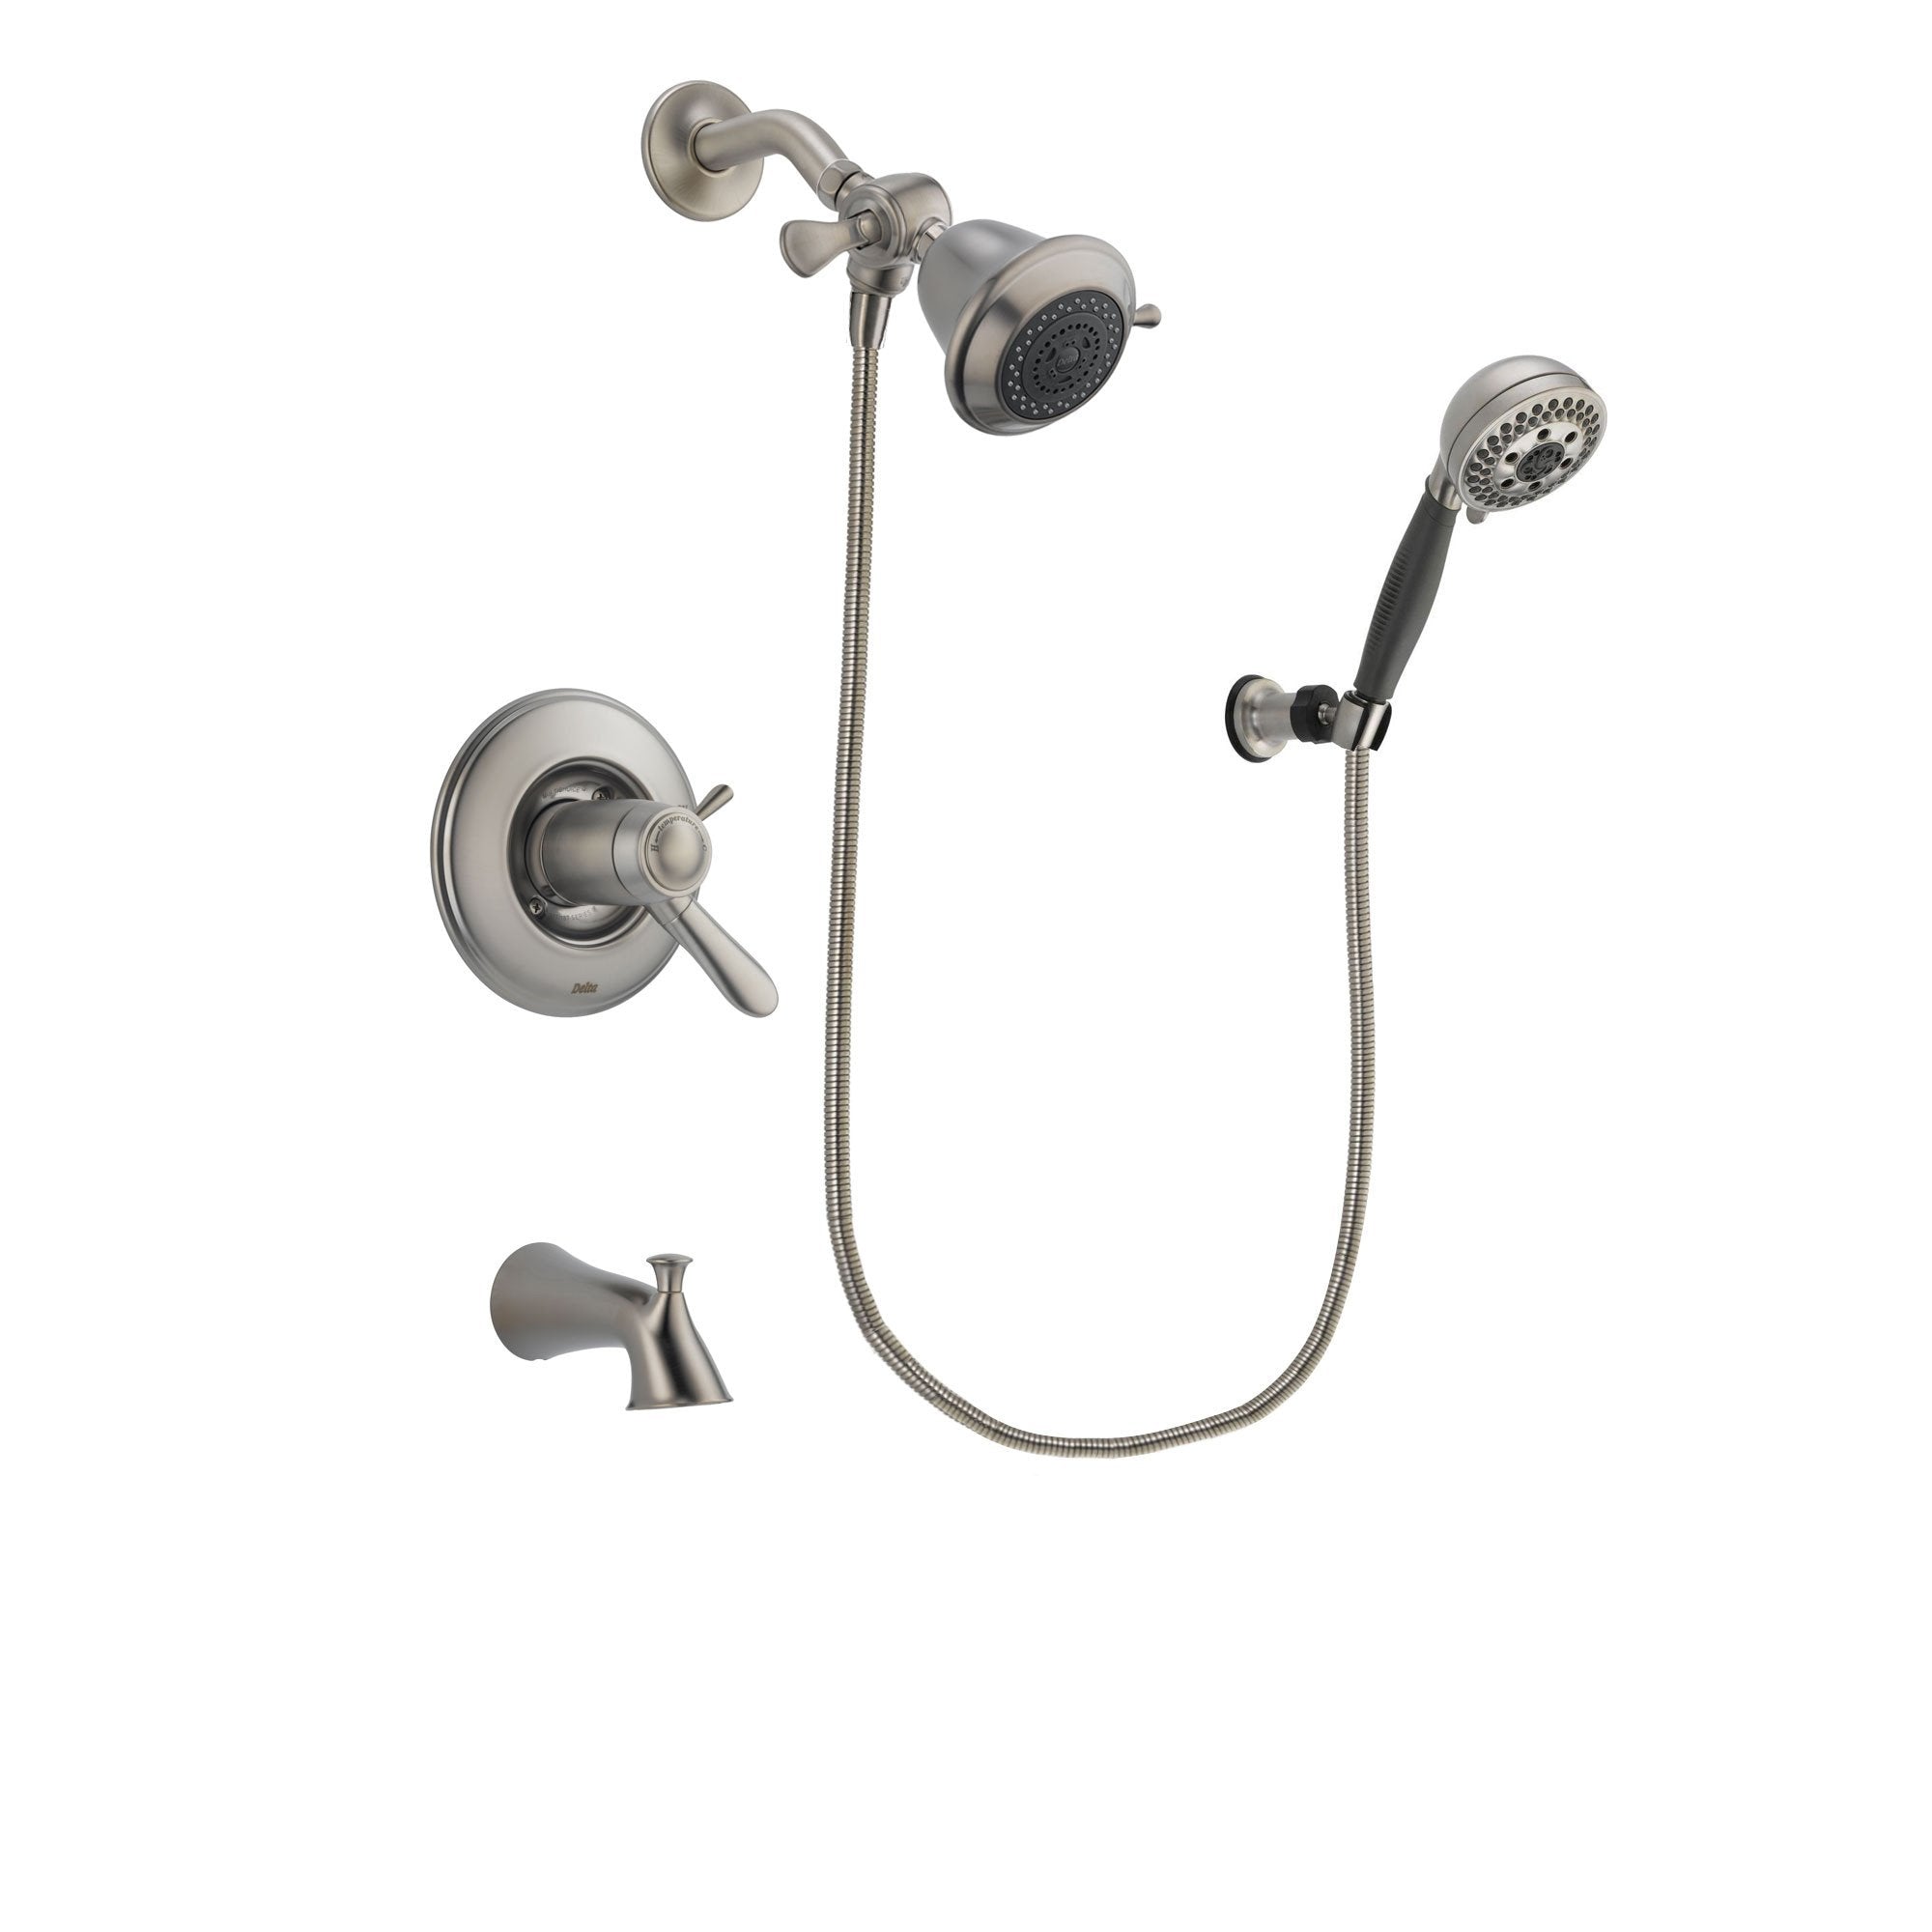 Delta Lahara Stainless Steel Finish Thermostatic Tub and Shower Faucet System Package with Shower Head and 5-Setting Wall Mount Personal Handheld Shower Includes Rough-in Valve and Tub Spout DSP1921V